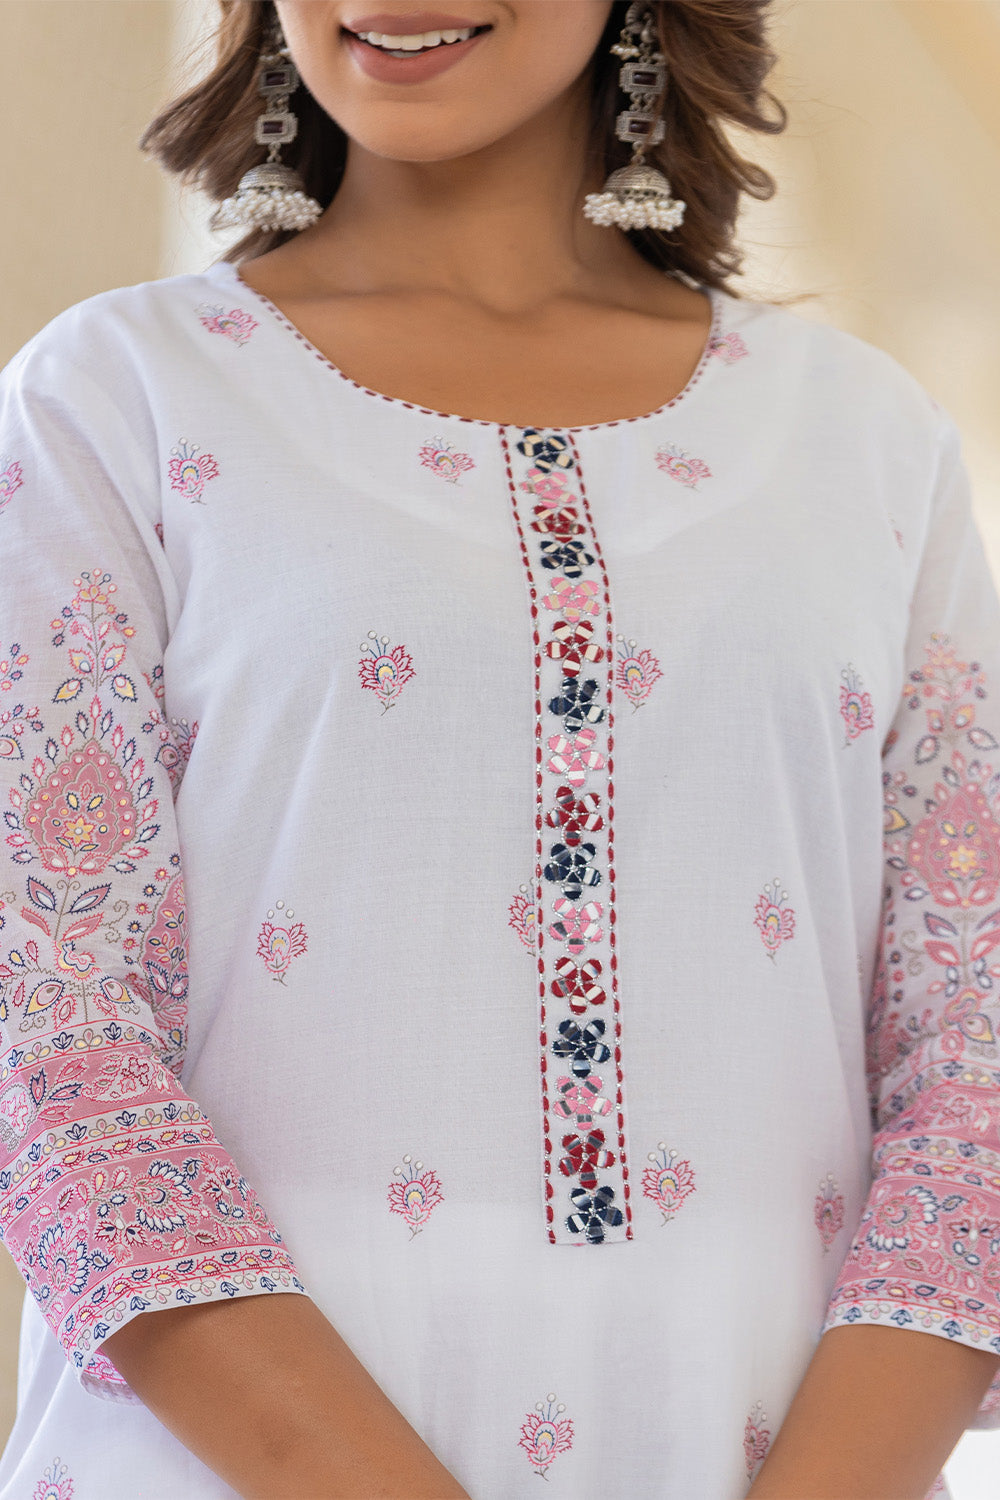 White & Pink Color Printed Cotton Suit